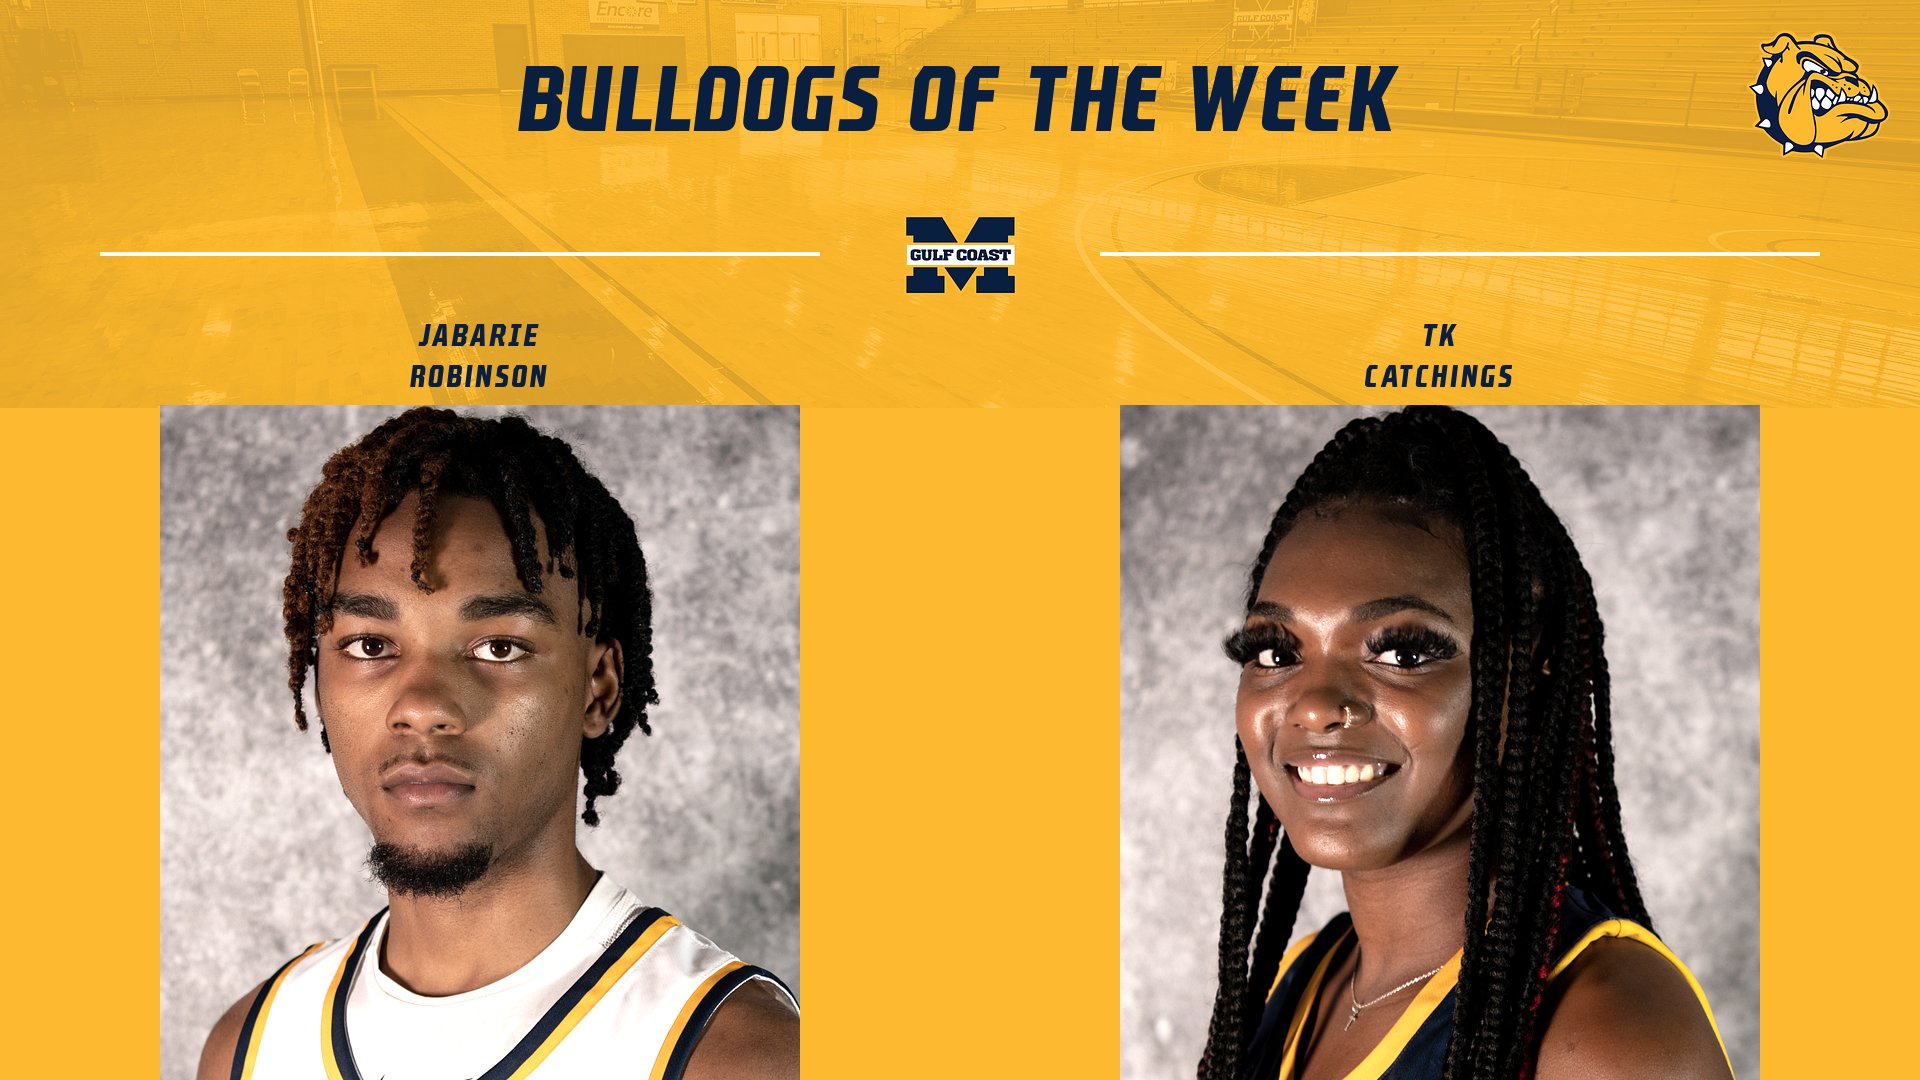 Robinson, Catchings named Bulldogs of the Week